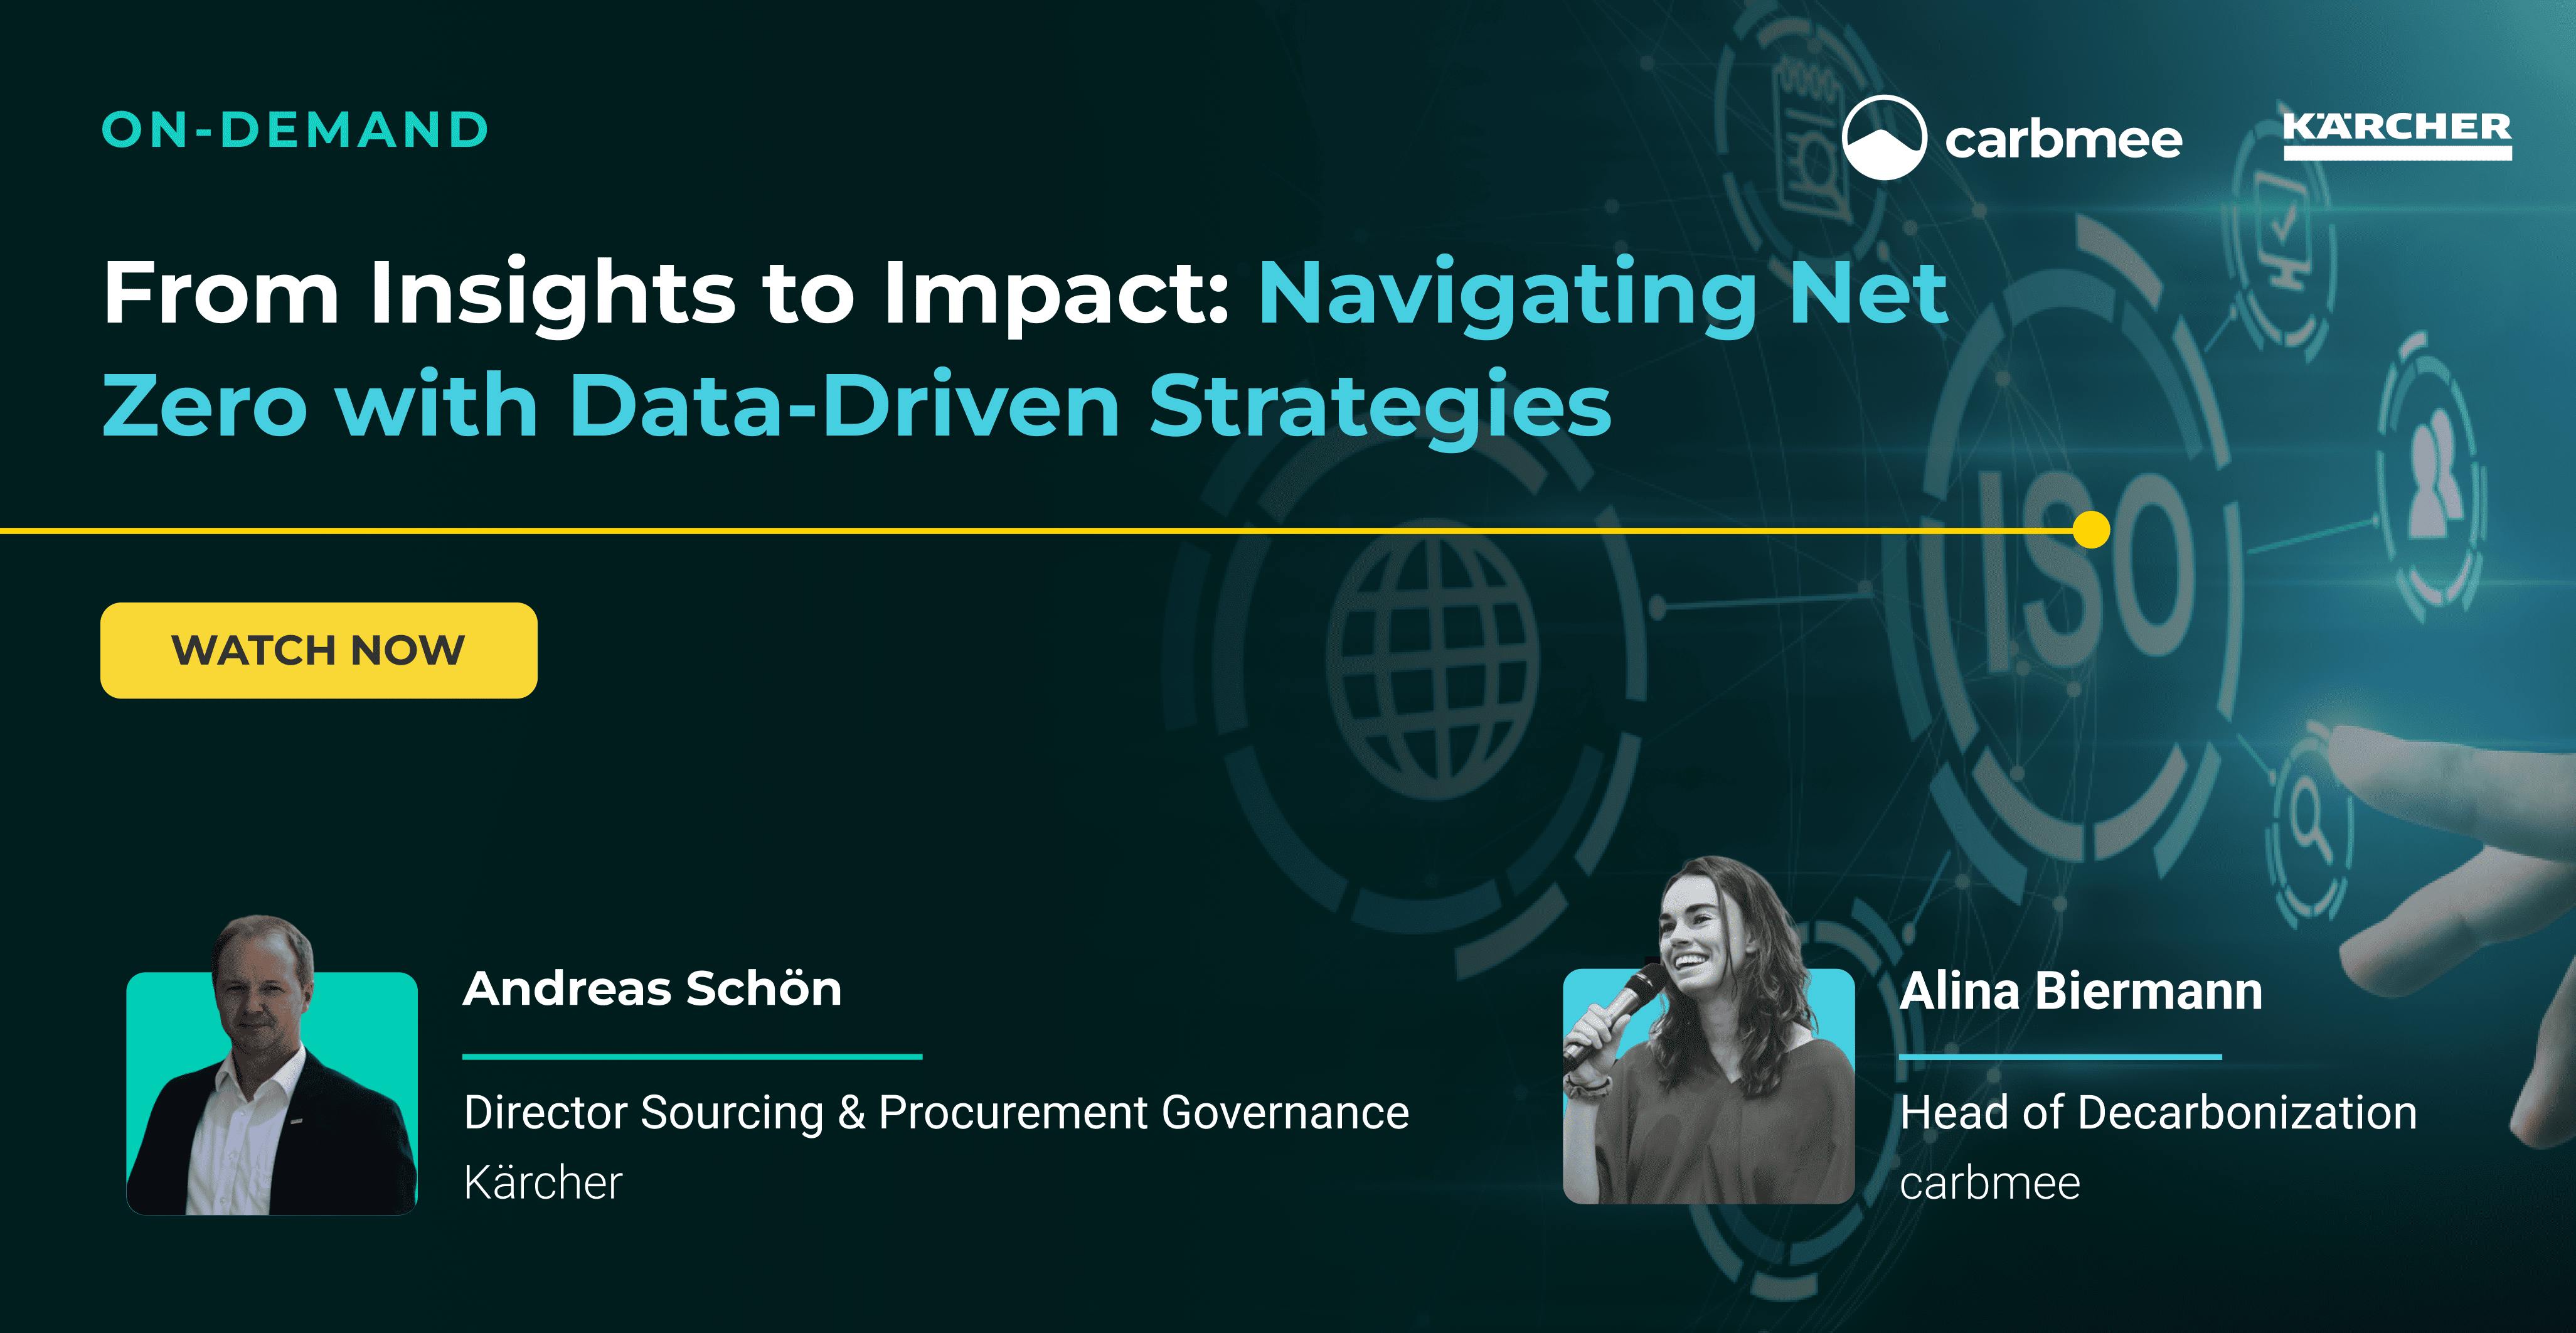 From Insights to Impact: Navigating Net Zero with Data-Driven Strategies